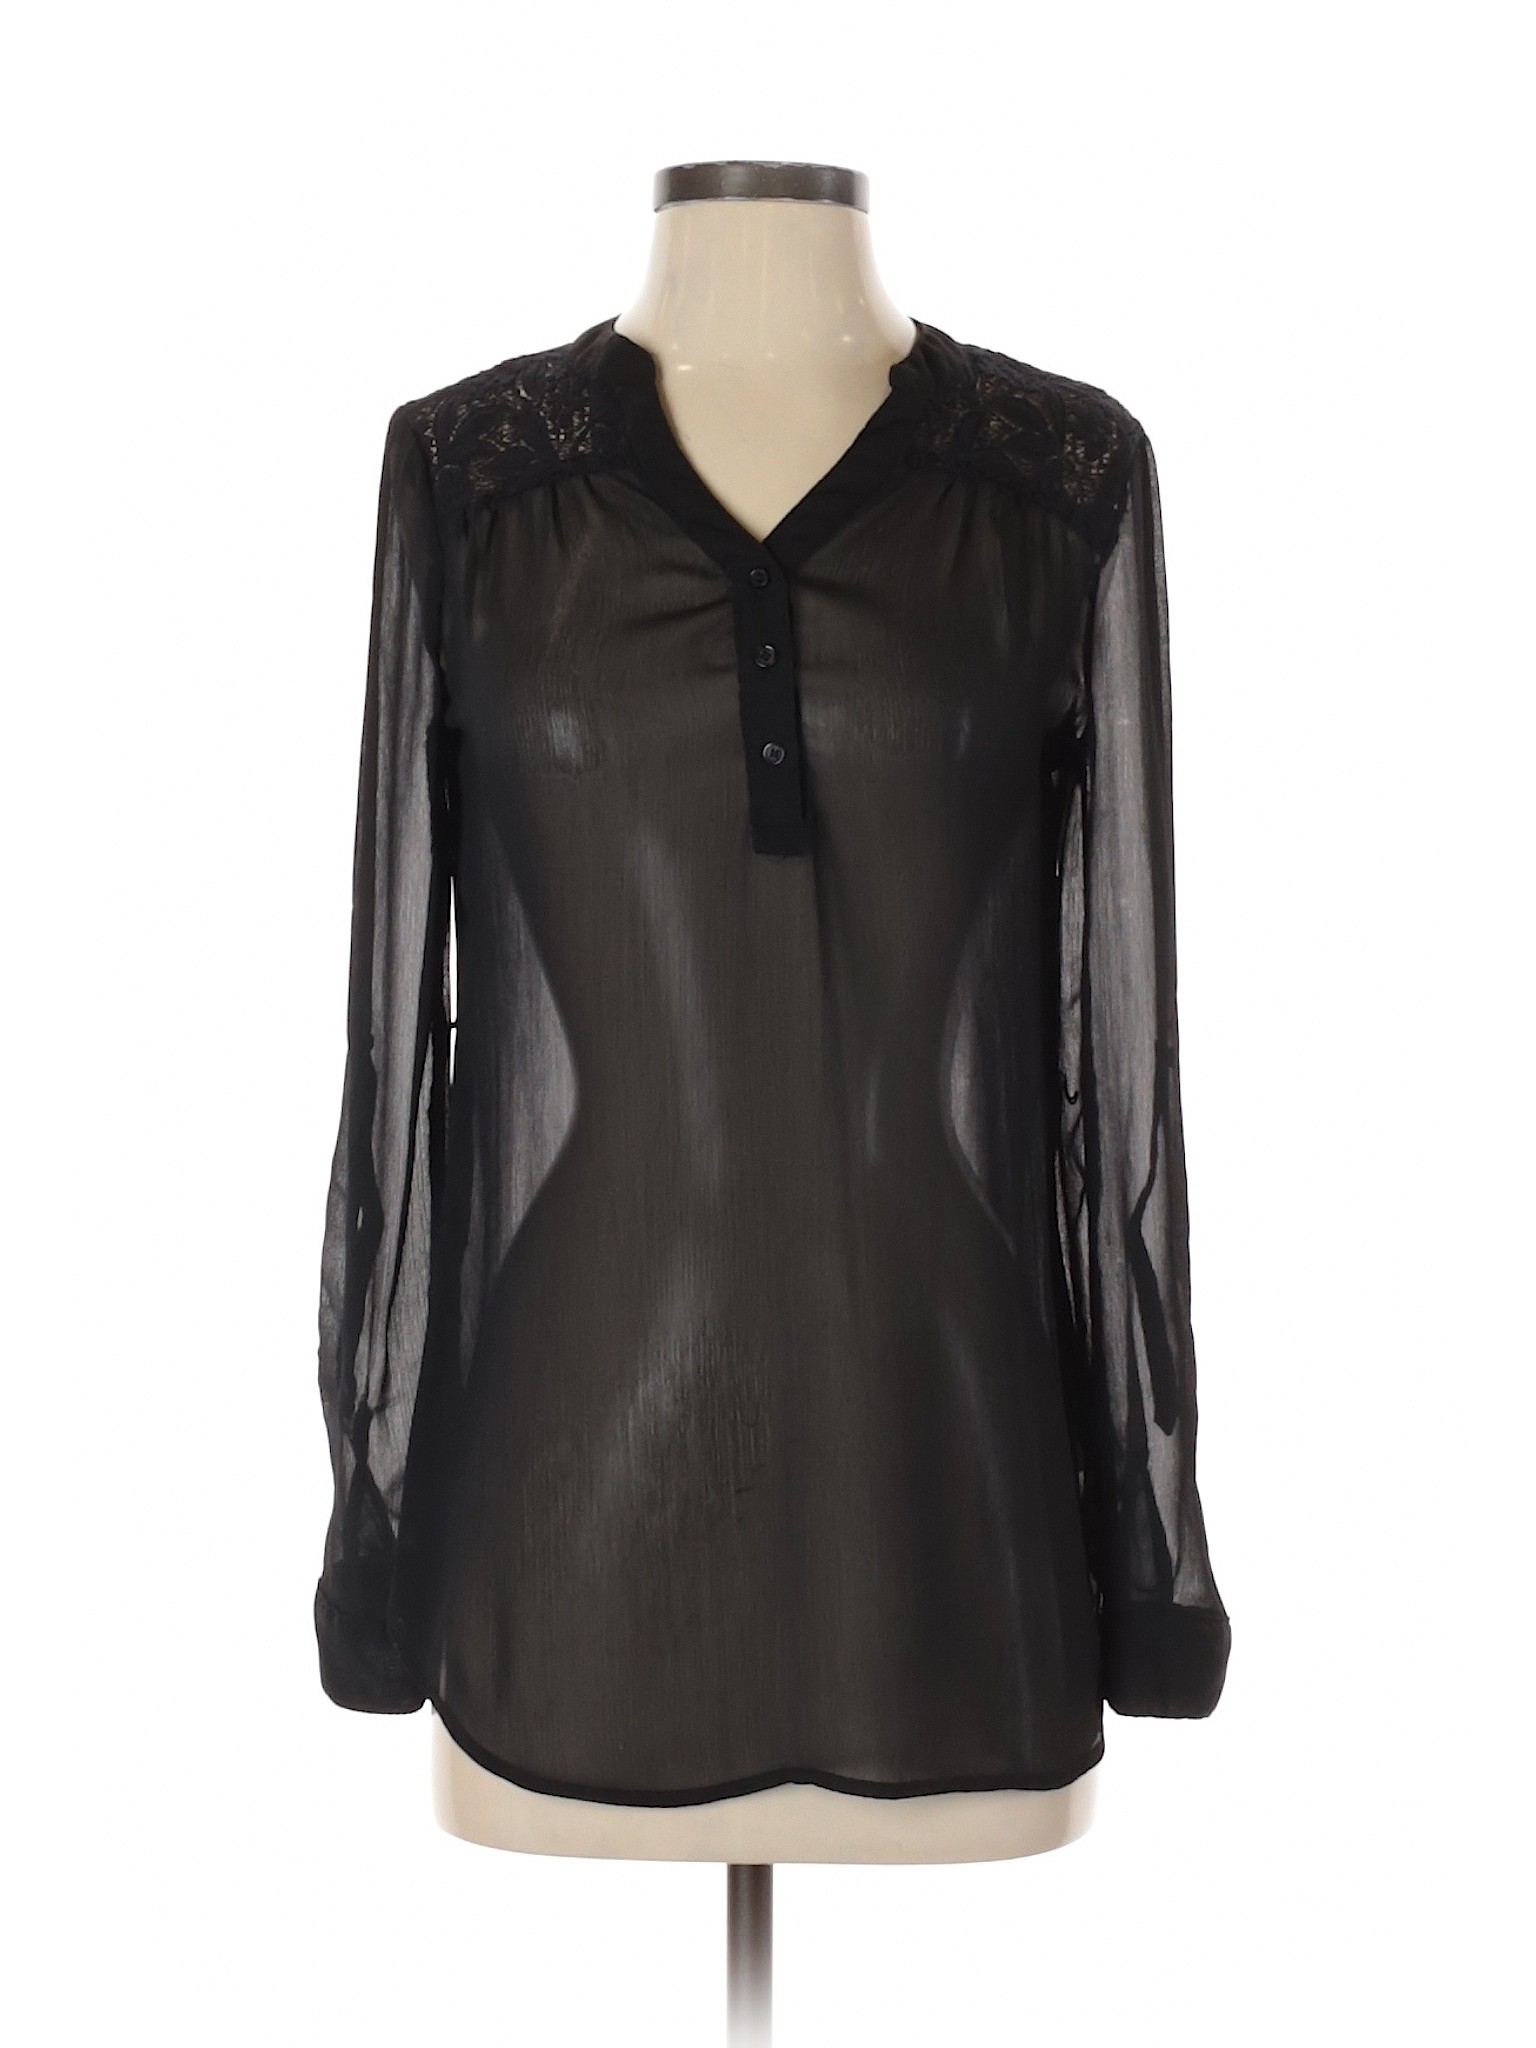 Mossimo 100% Polyester Black Long Sleeve Blouse Size S - 79% off | thredUP